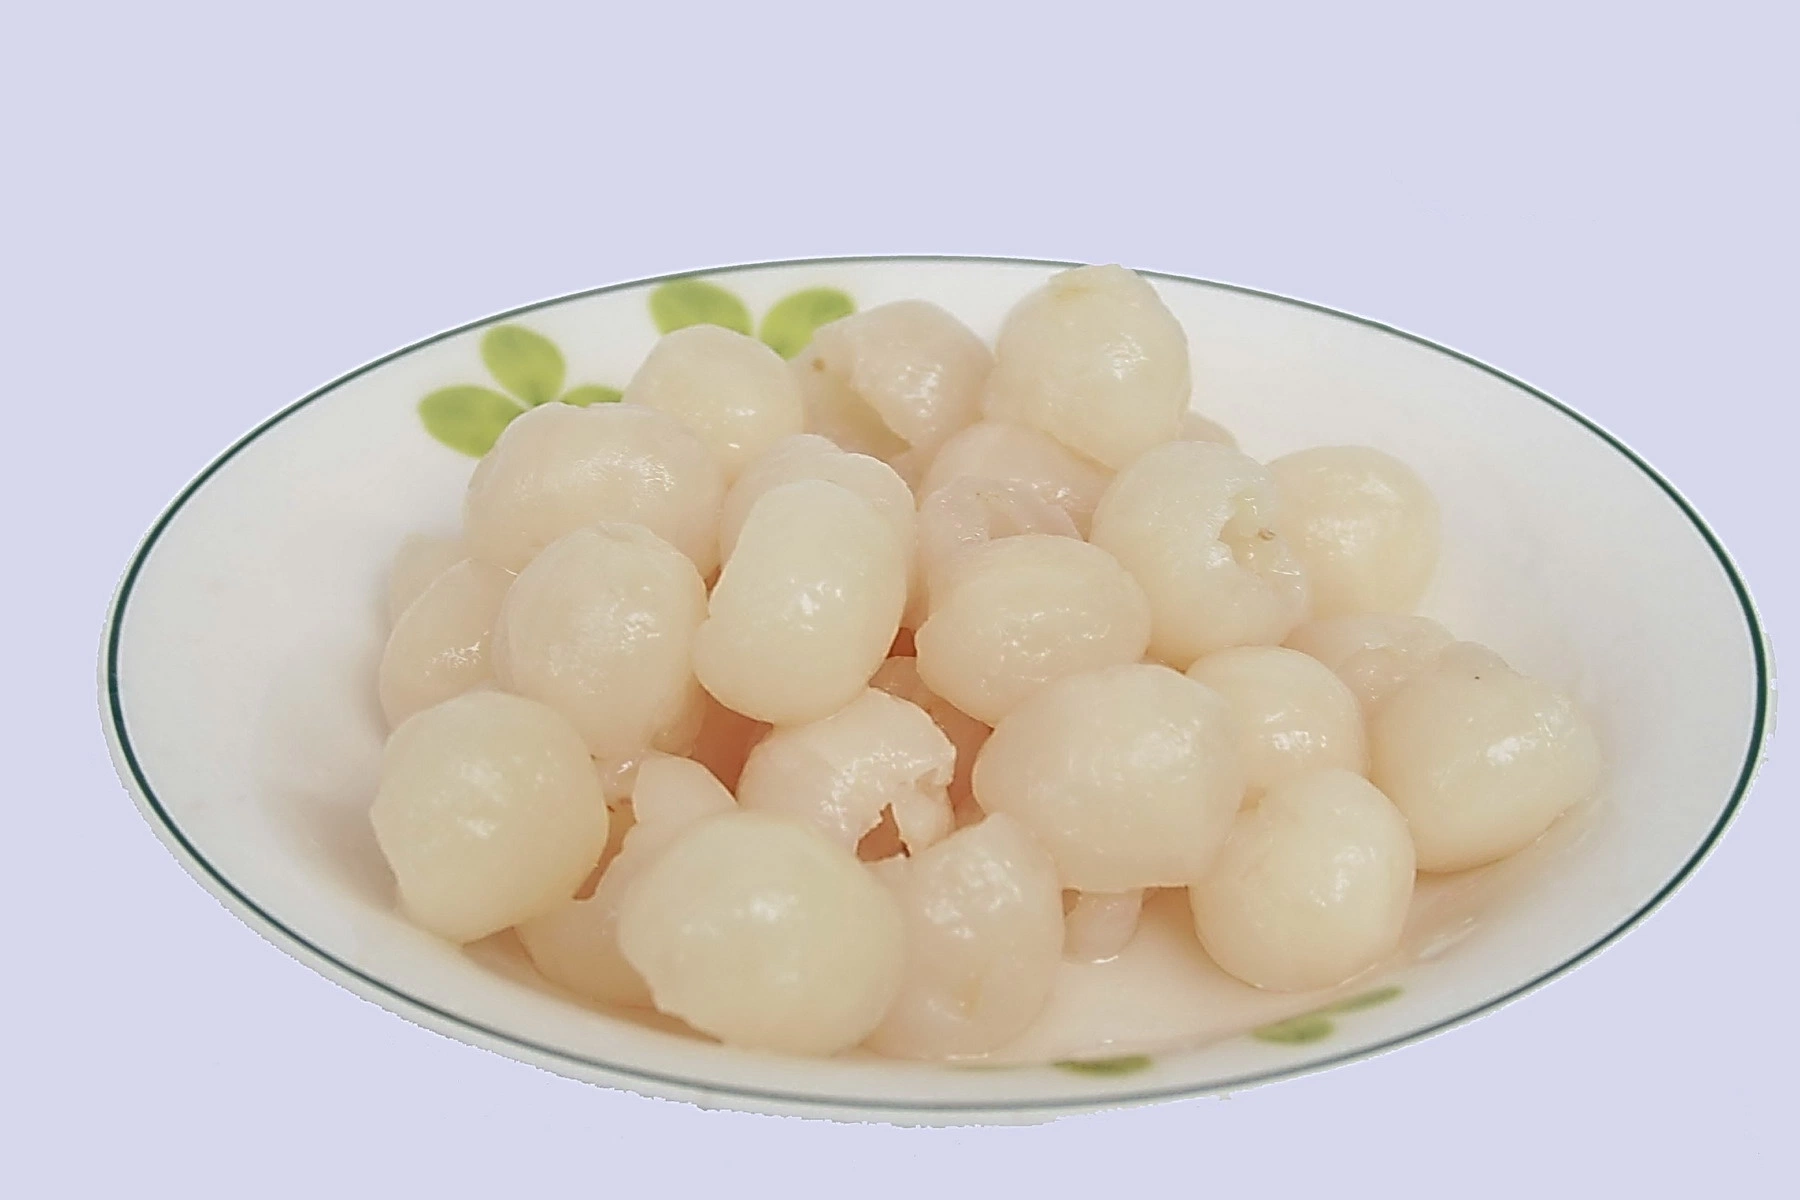 New Season Good Quality Cheap Price 567g Canned Longan Fruit in Syrup Wholesale/Supplierr